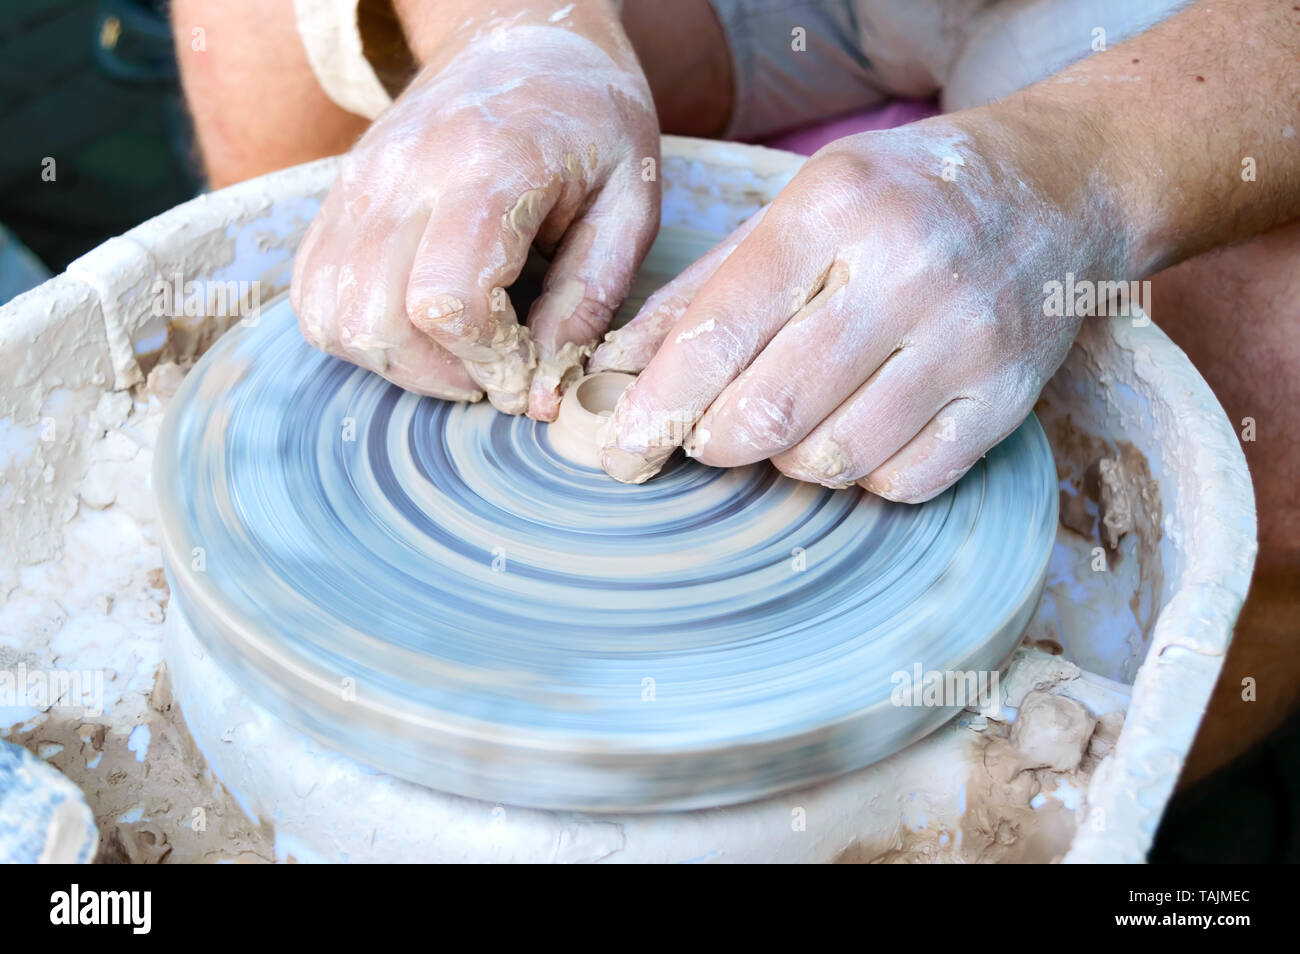 Making pottery on a potter's wheel. Hands craftsman close-up, mold dishes. Master class Stock Photo